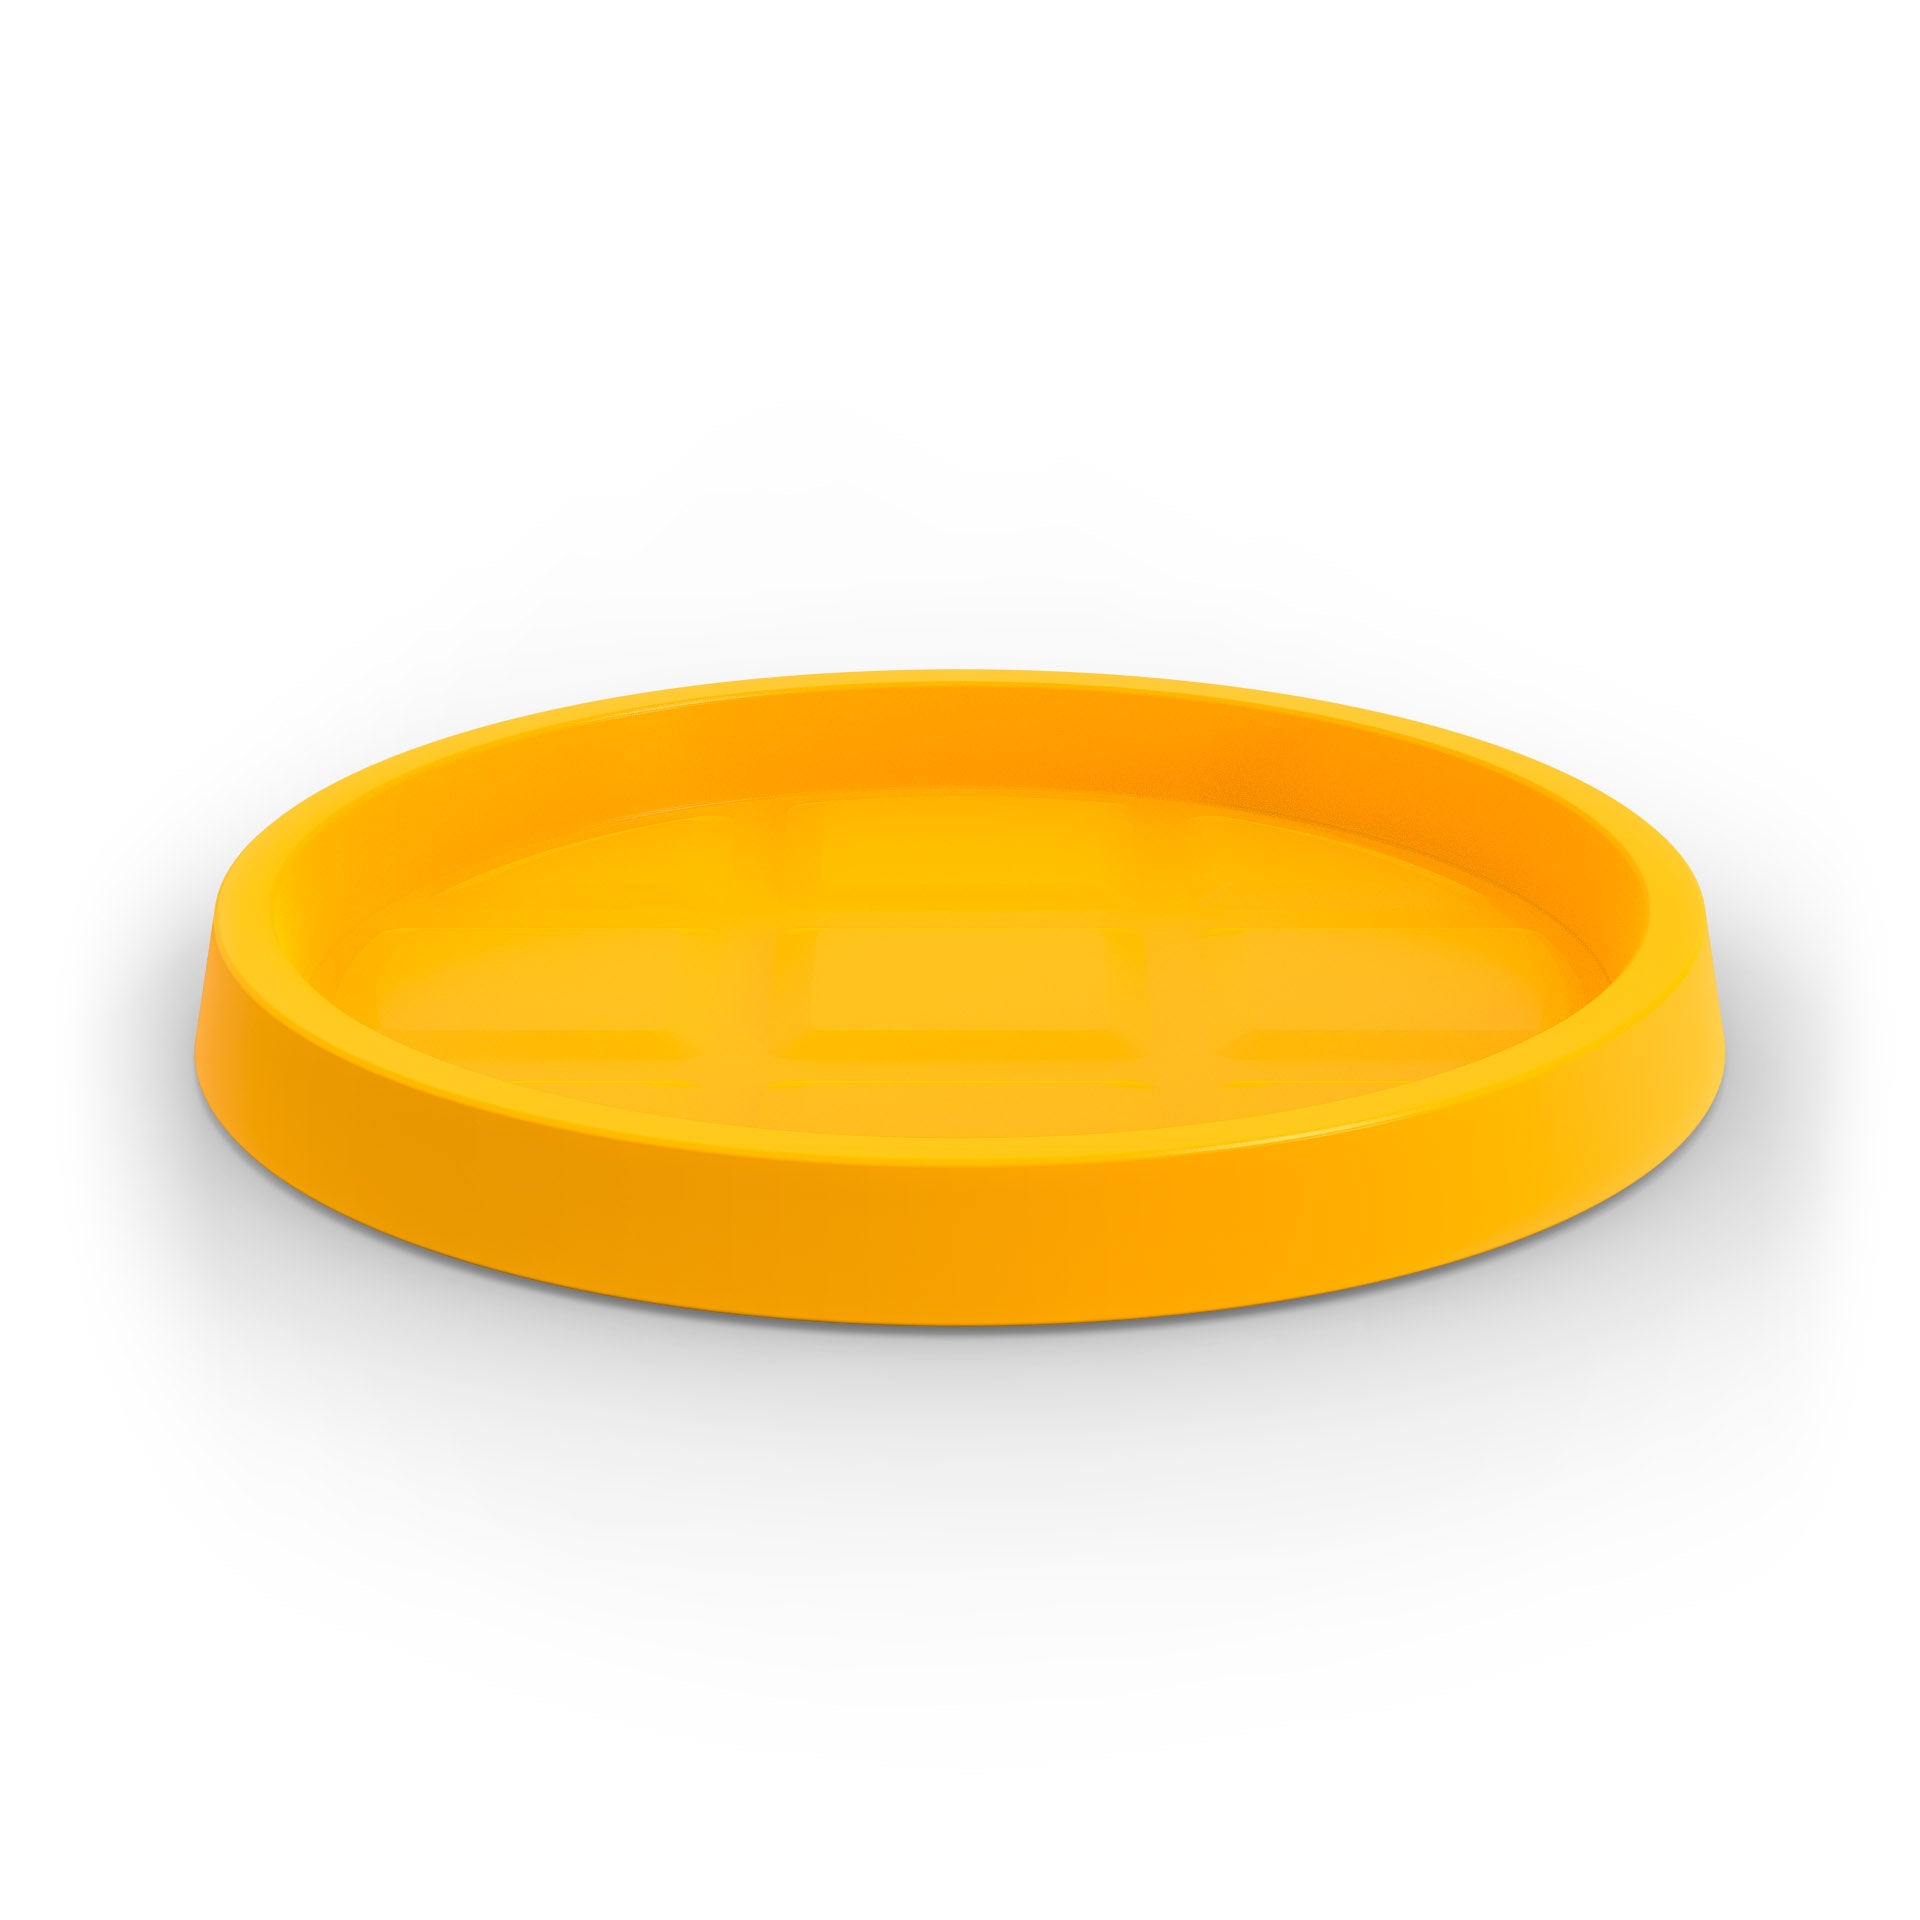 A yellow saucer for Modscene planters. NZ made.